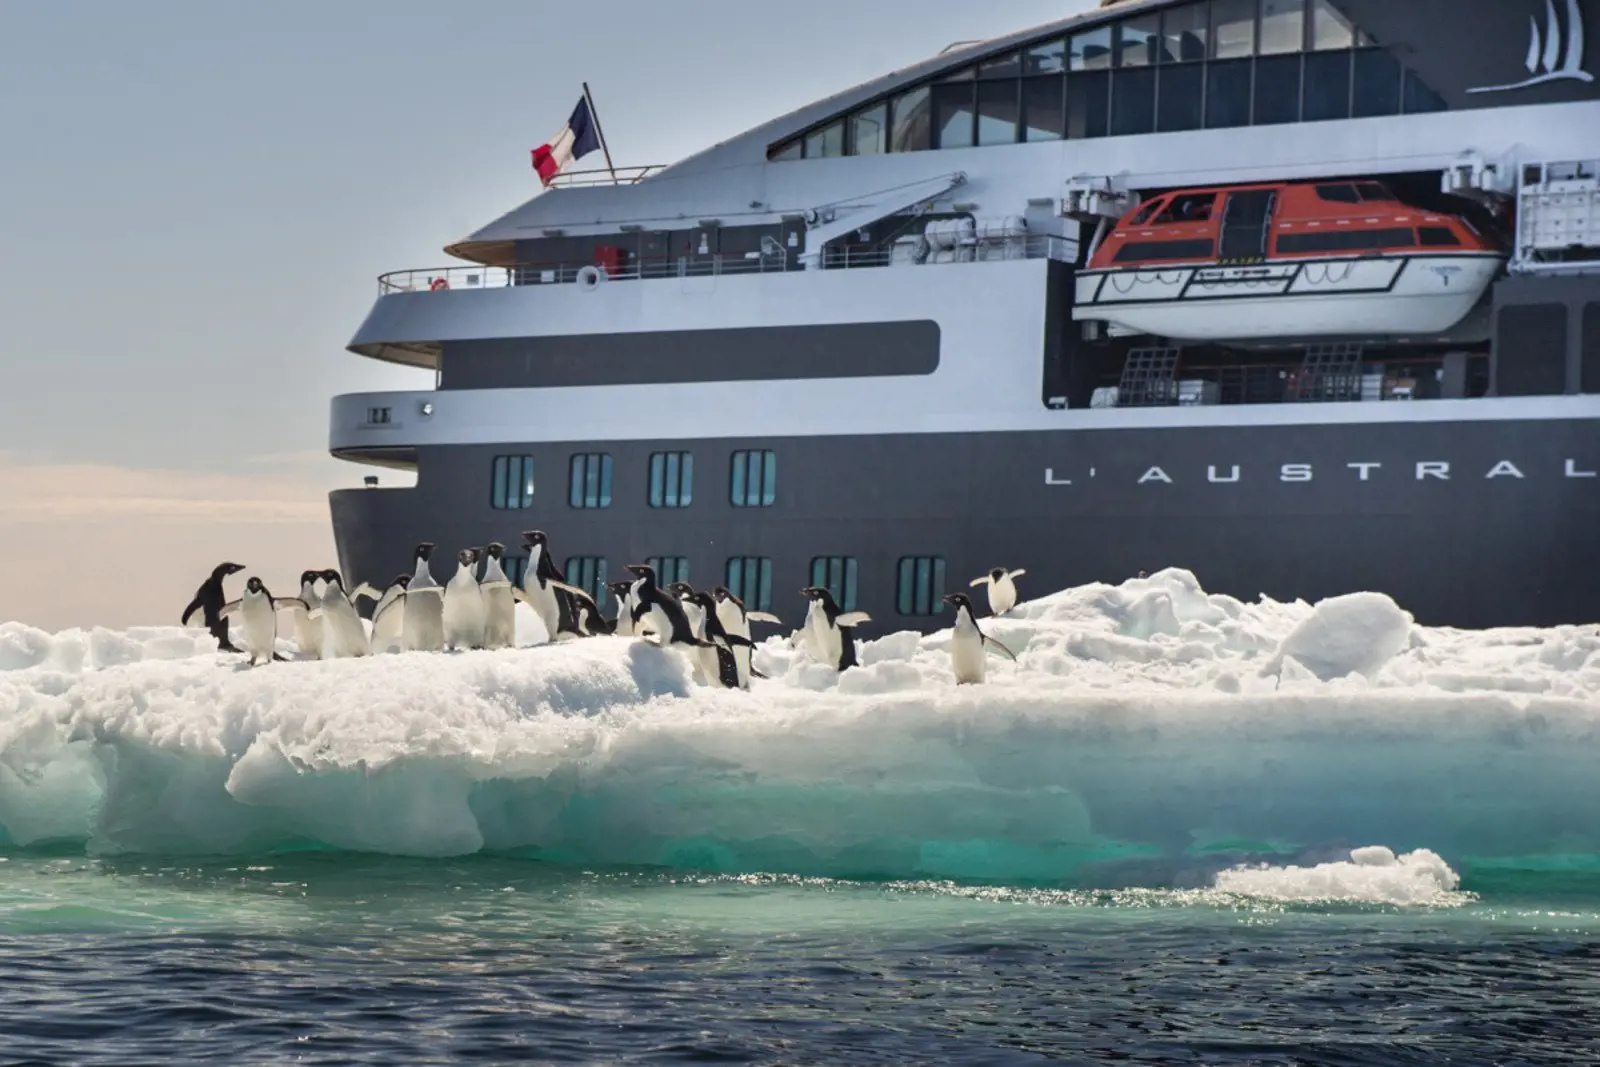 L'Austral pictured alongside a ice burg loaded with penguins